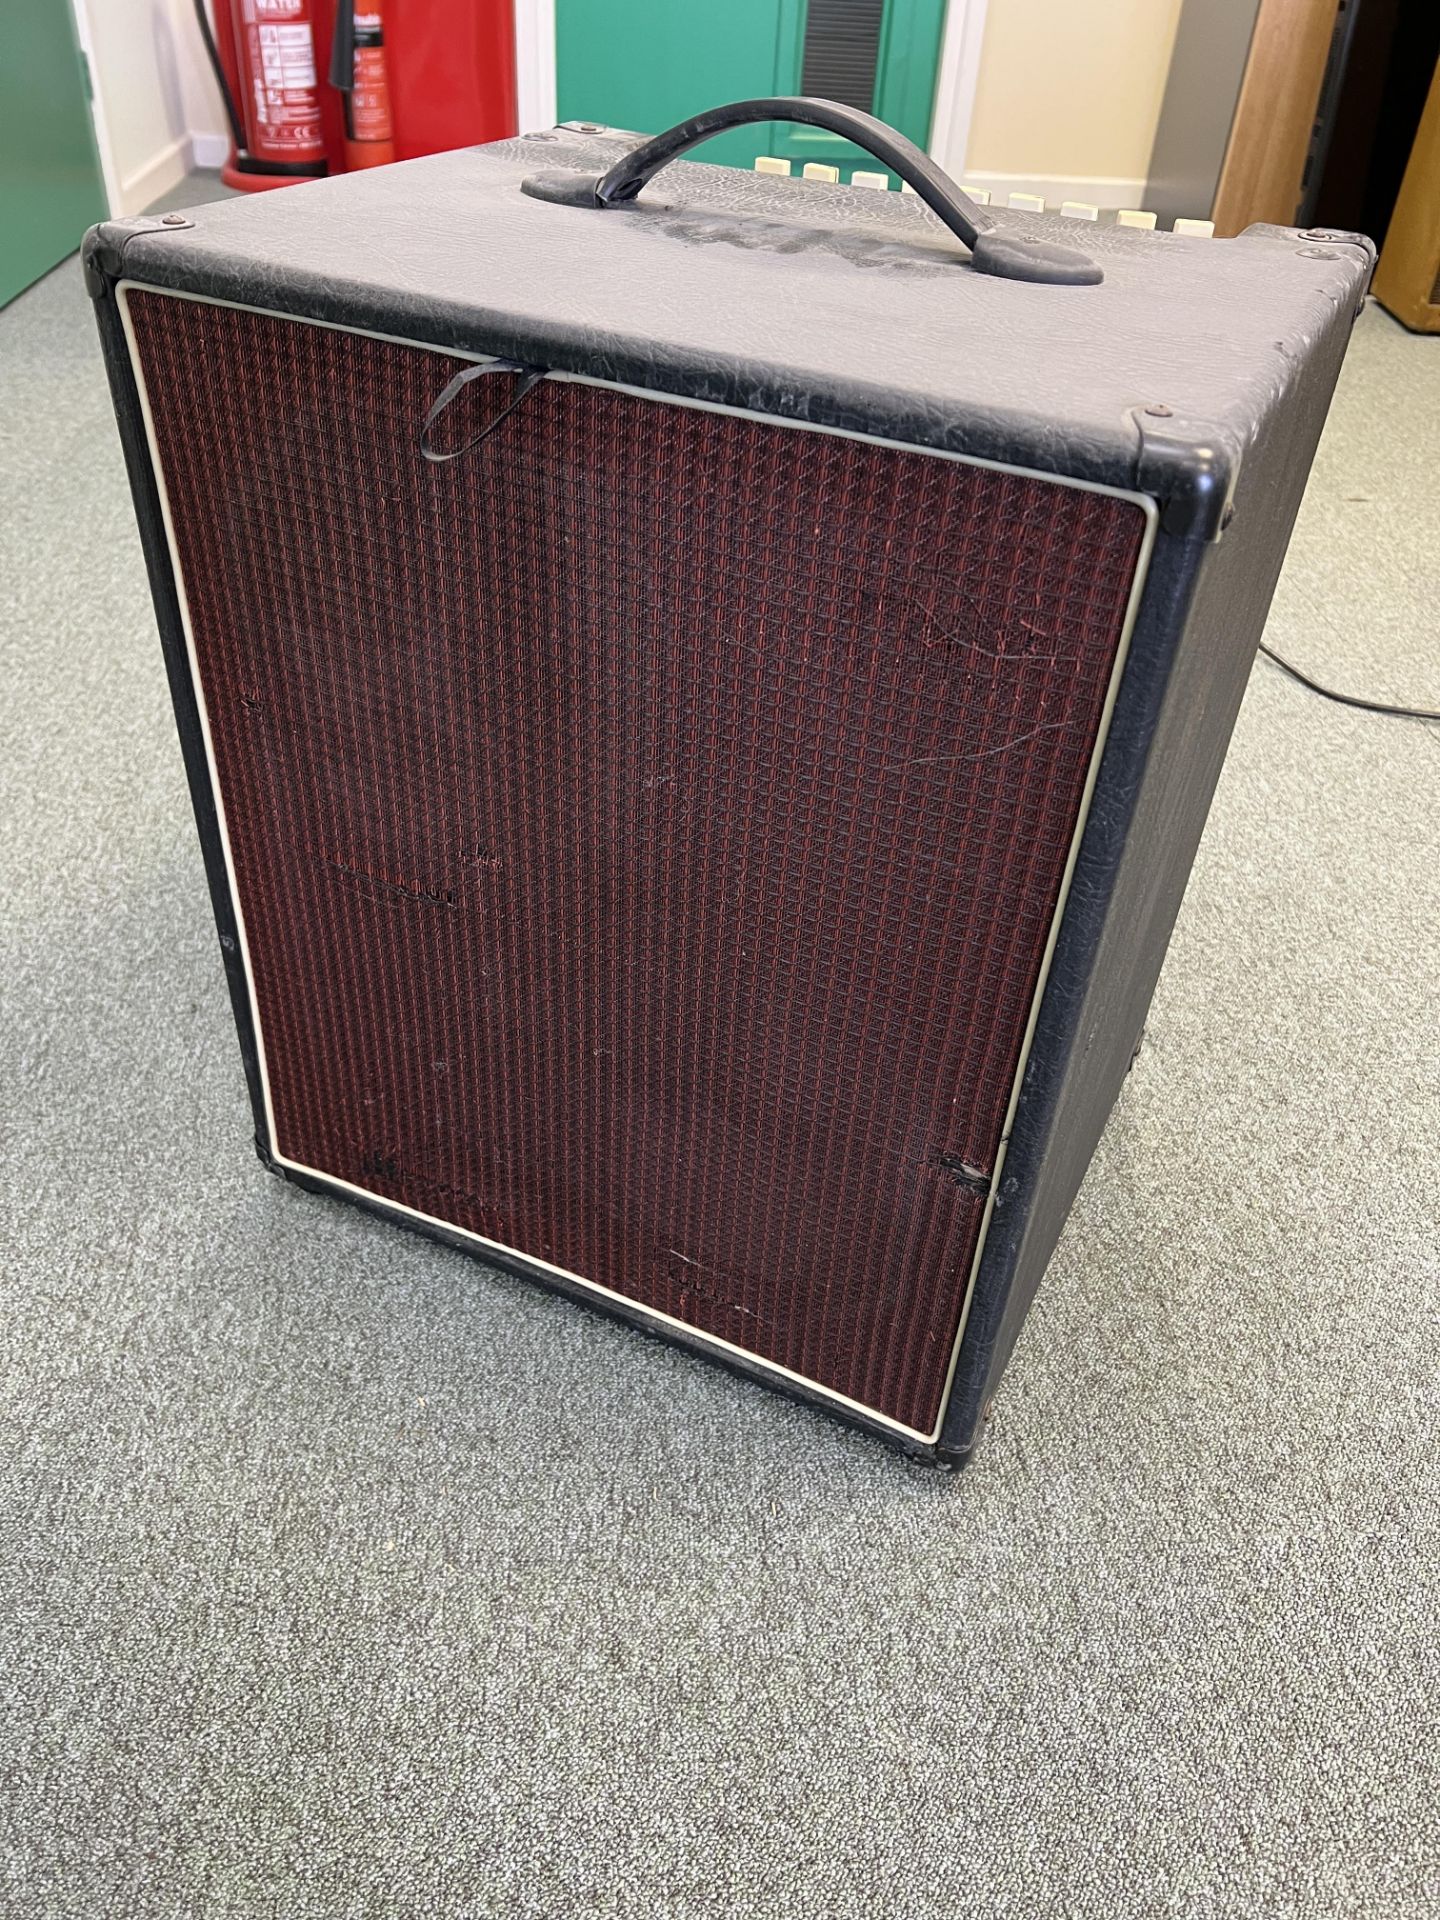 Ashdown Engineering AAA Access All Areas Evolution Guitar Amp. Model: AAA-300 210T. Serial No: